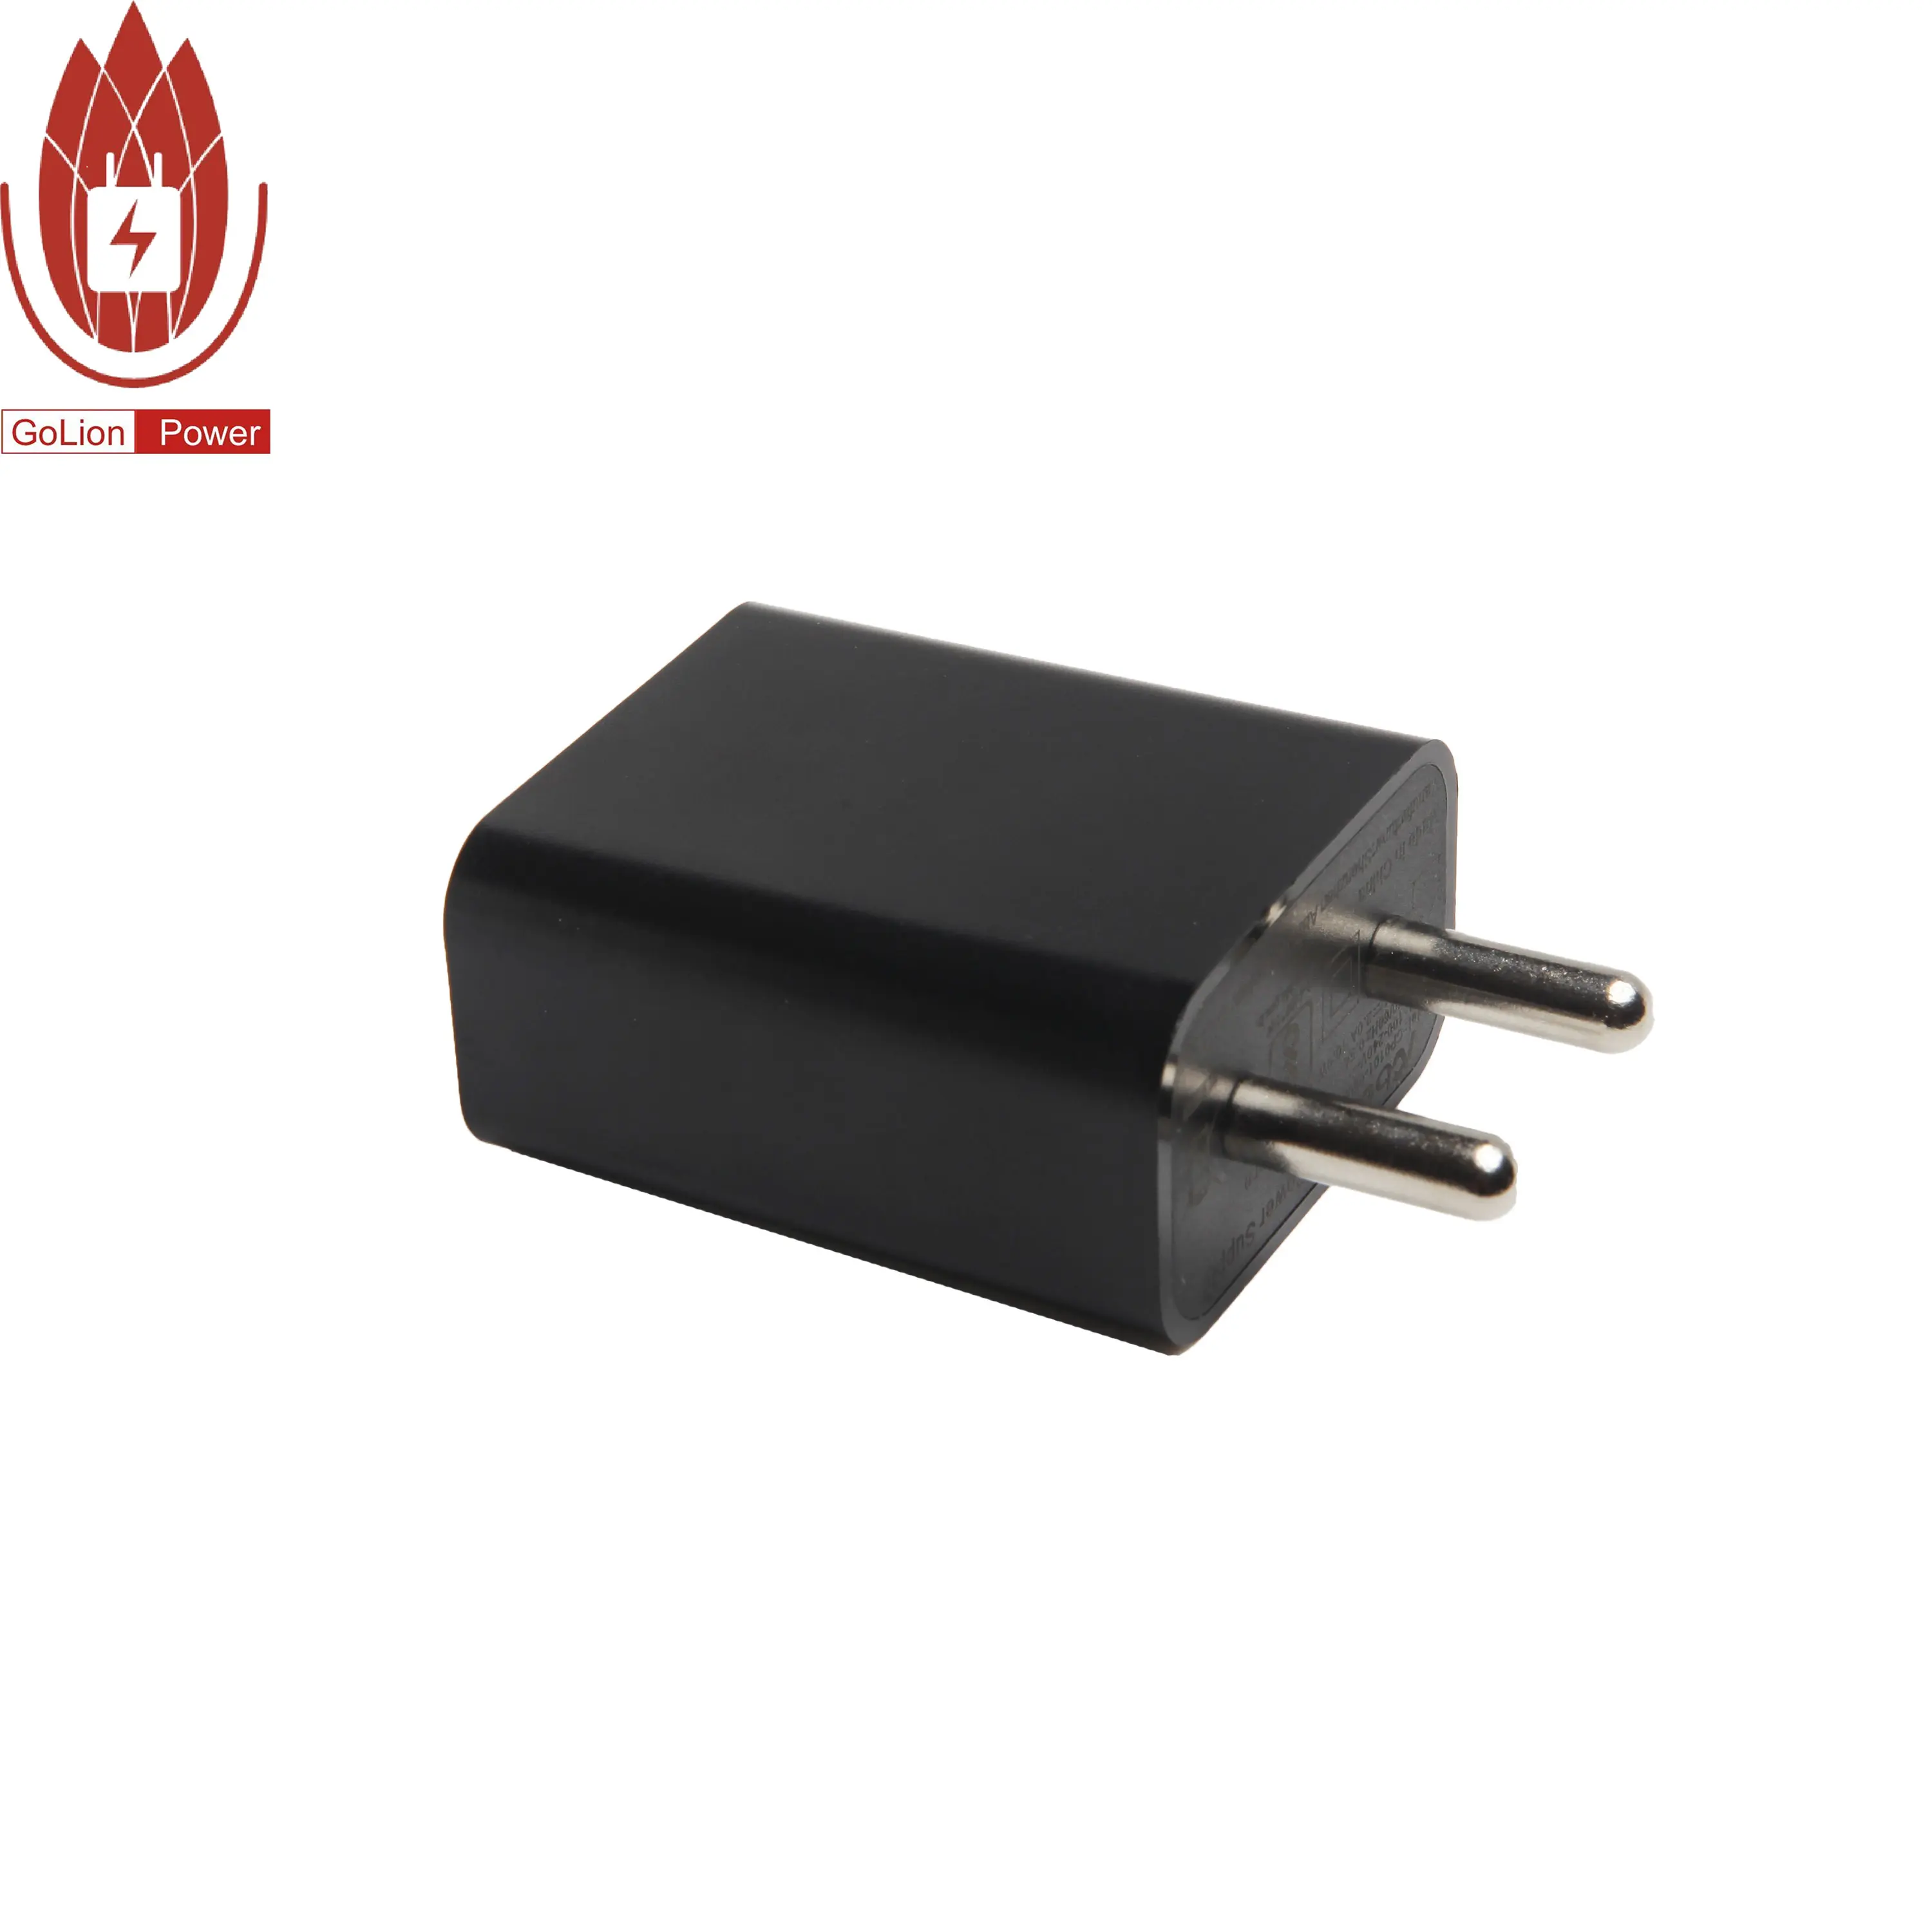 Hot sale factory direct 2 amp usb wall charger Indian plug 5V 2A with BIS certification